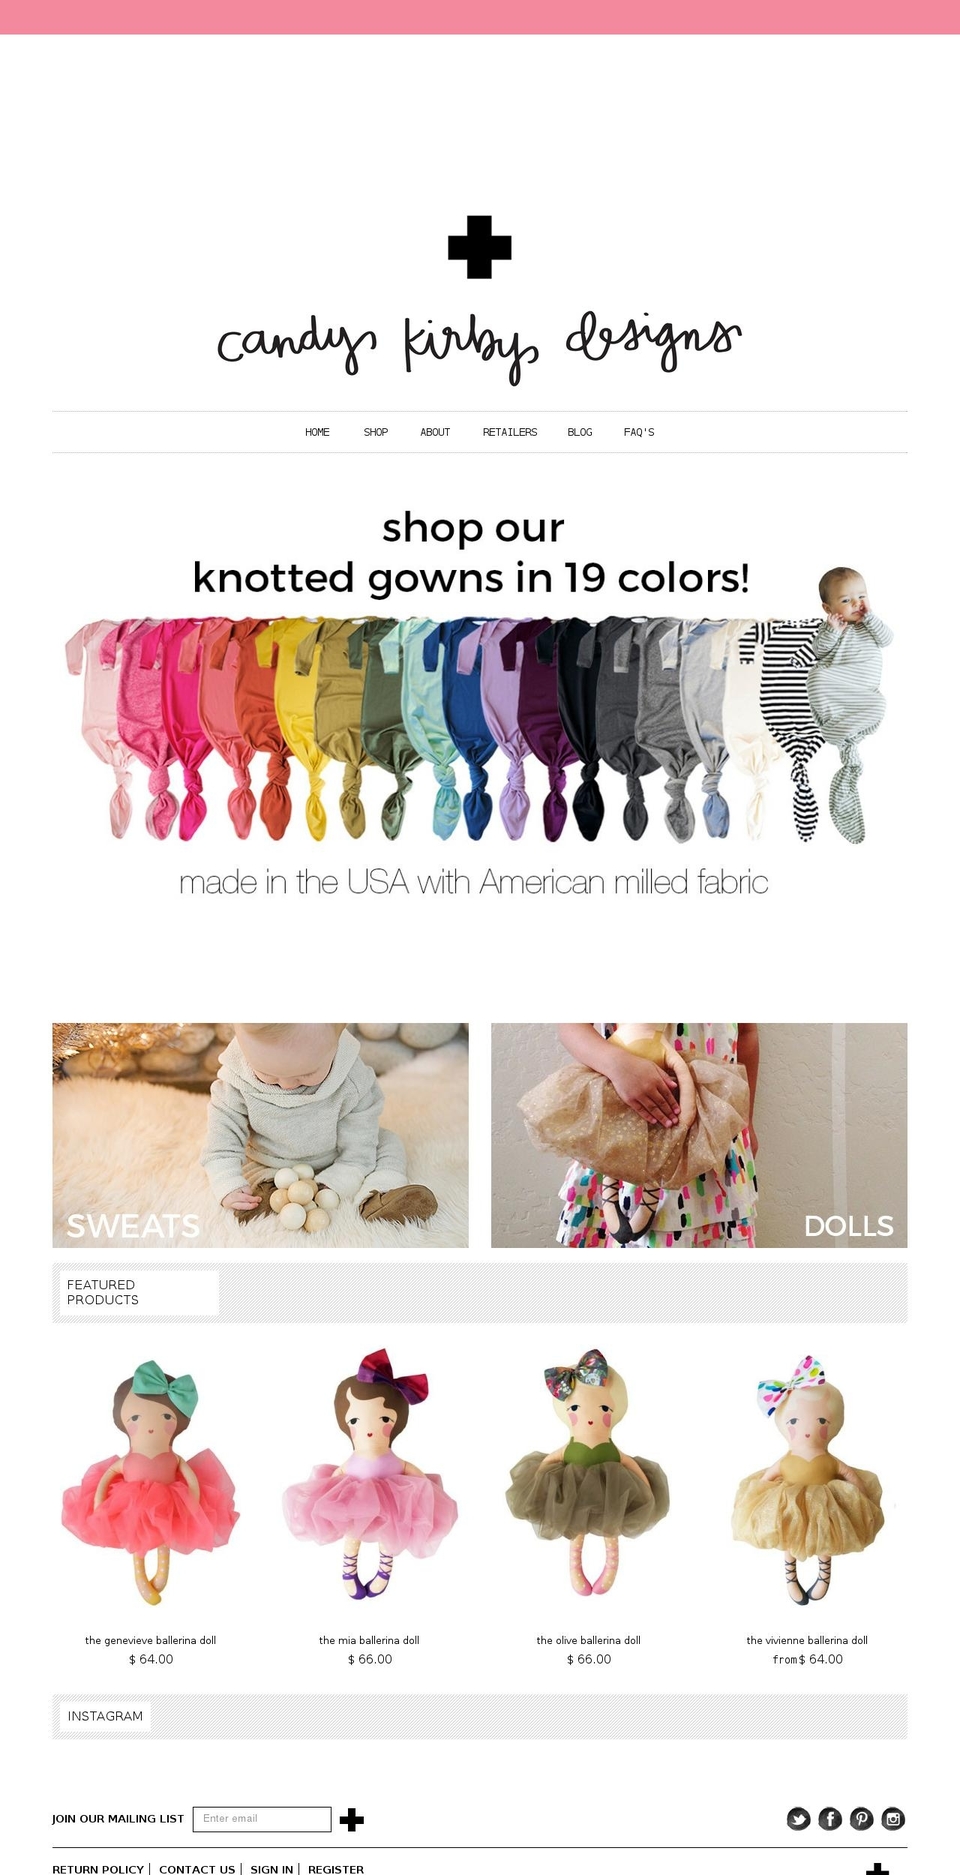 Envy Shopify theme site example candykirbydesigns.com